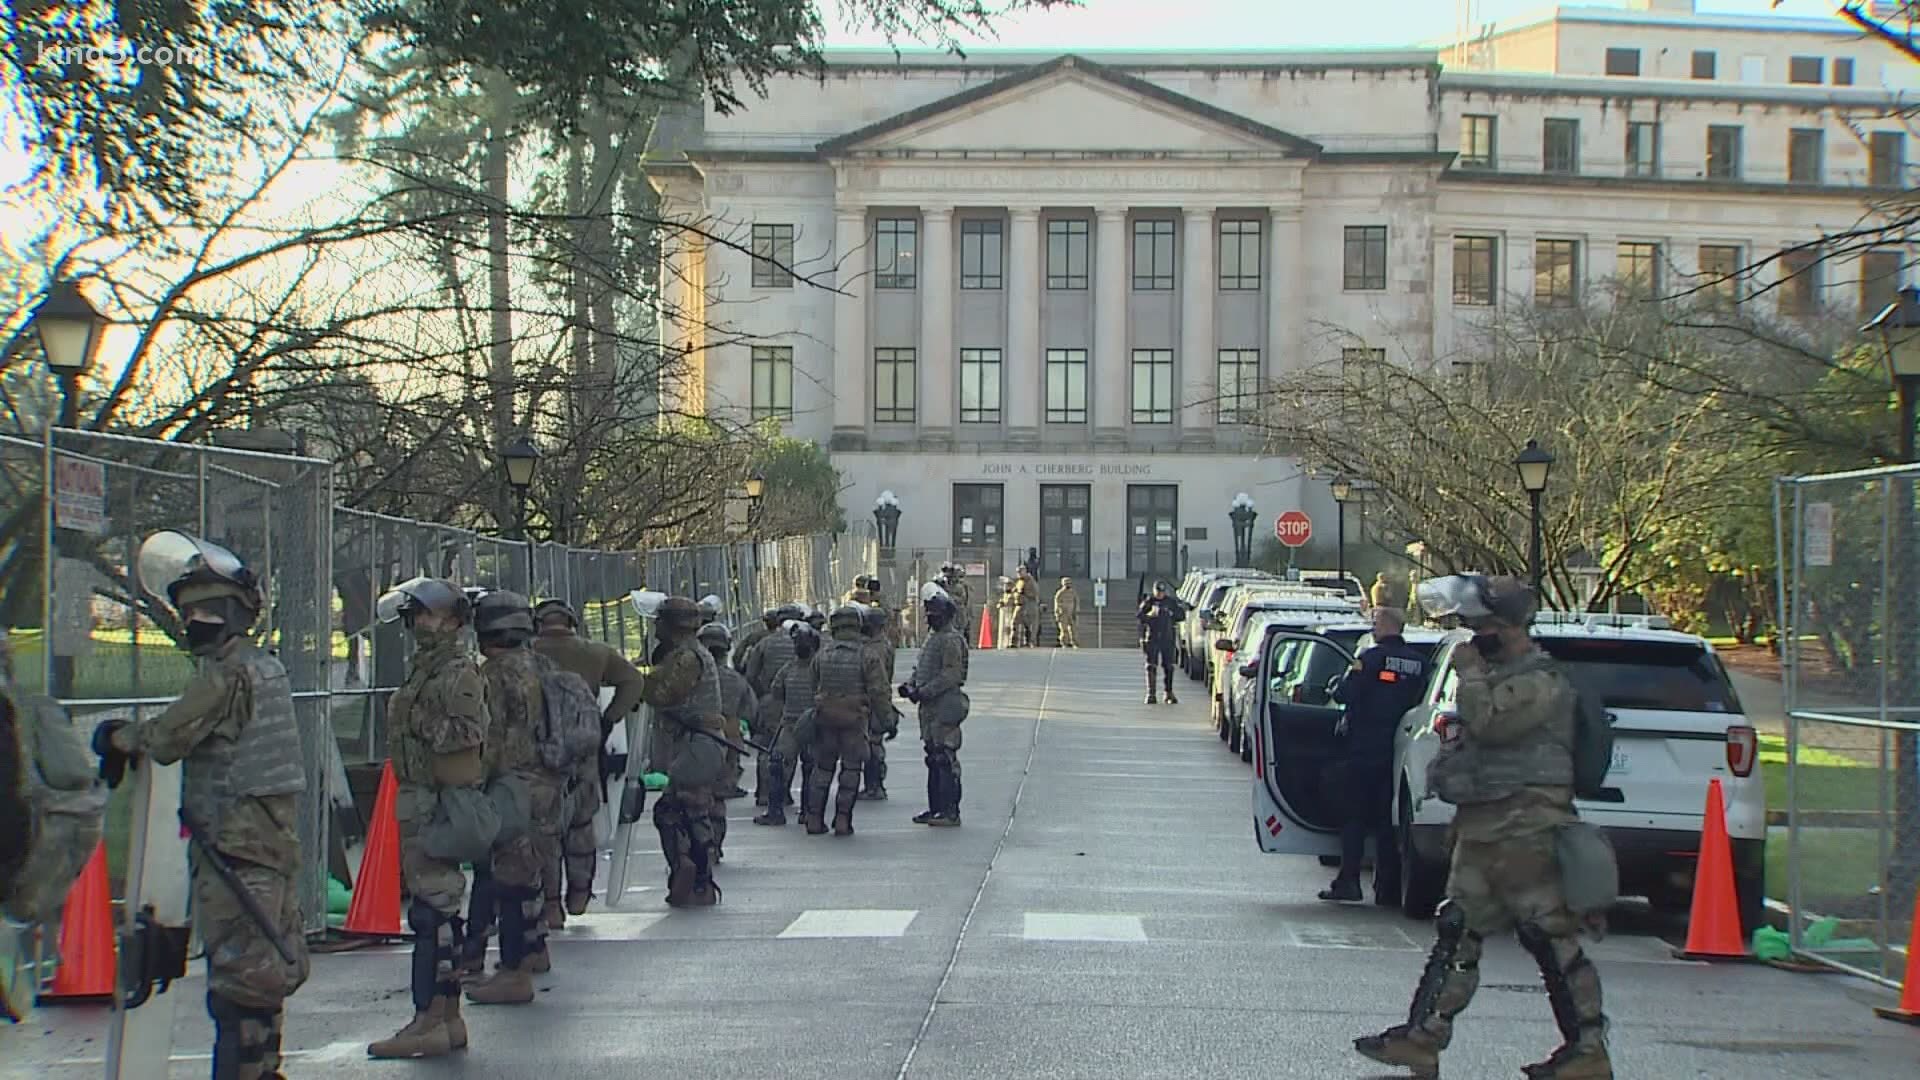 Up to 750 Washington National Guard members have been activated to ramp up security through the weekend.